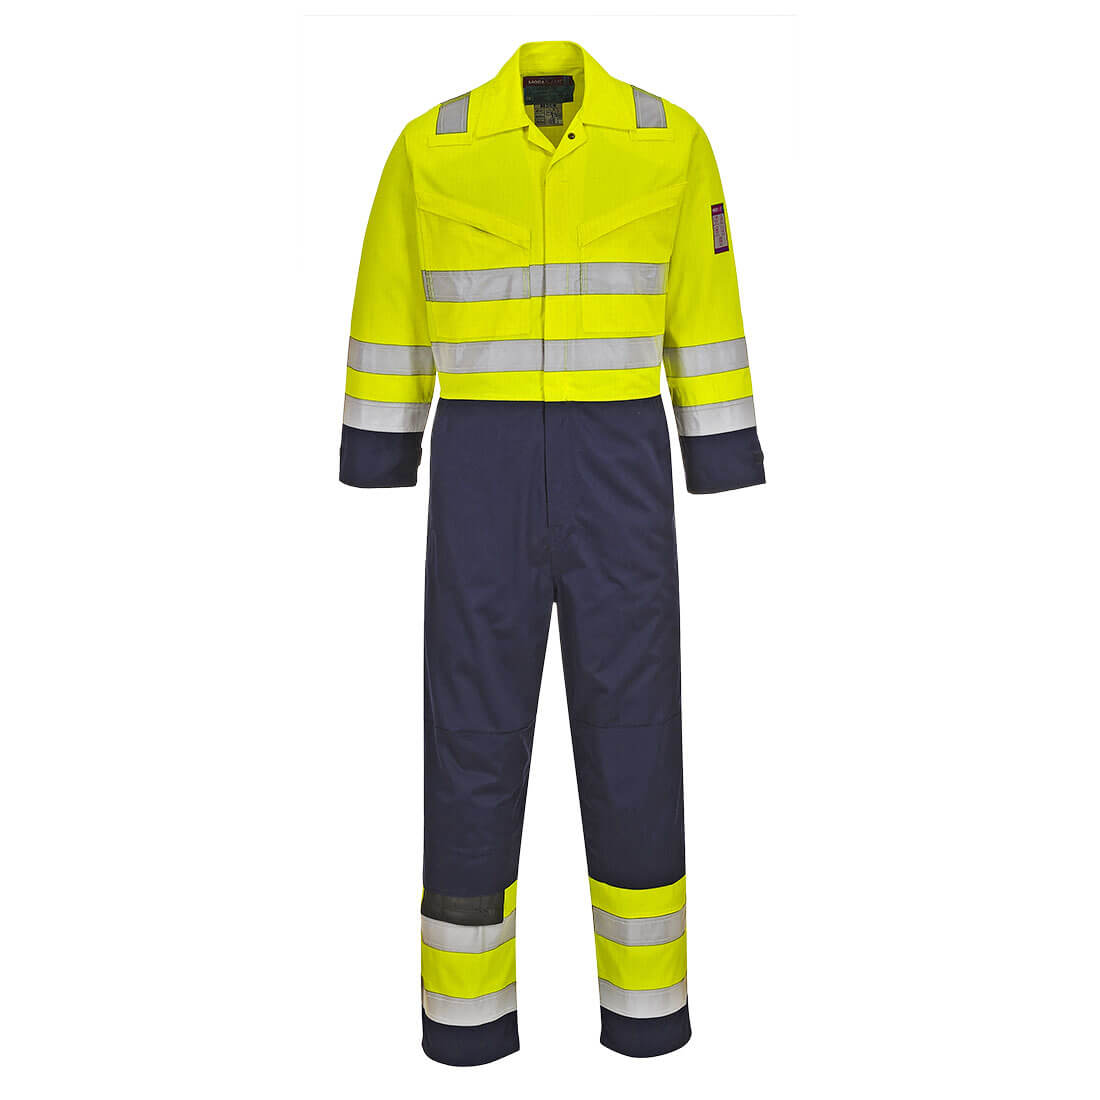 Image of Modaflame Flame Resistant Hi Vis Overall Yellow / Navy XL 32"